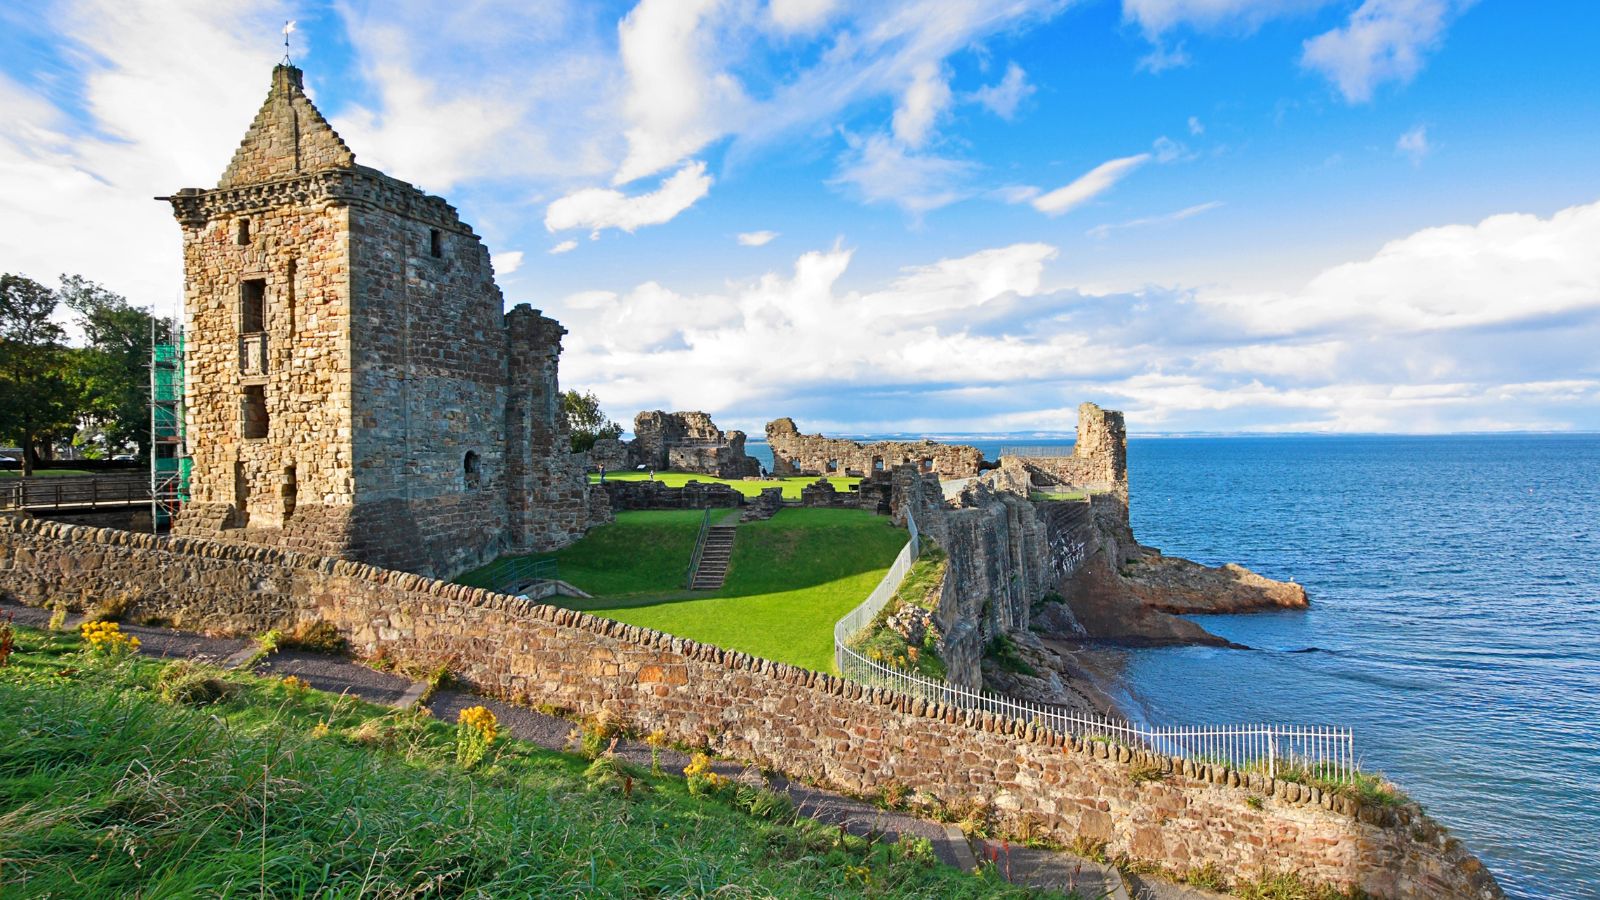 <p>Trying to figure out the best time to visit Scotland? Find answers here, as well as all the info you need to pick the best time to visit for you.</p><p><a href="https://www.whatsdannydoing.com/best-time-to-visit-scotland" rel="noopener"><strong>THE BEST TIME TO VISIT SCOTLAND</strong></a></p>